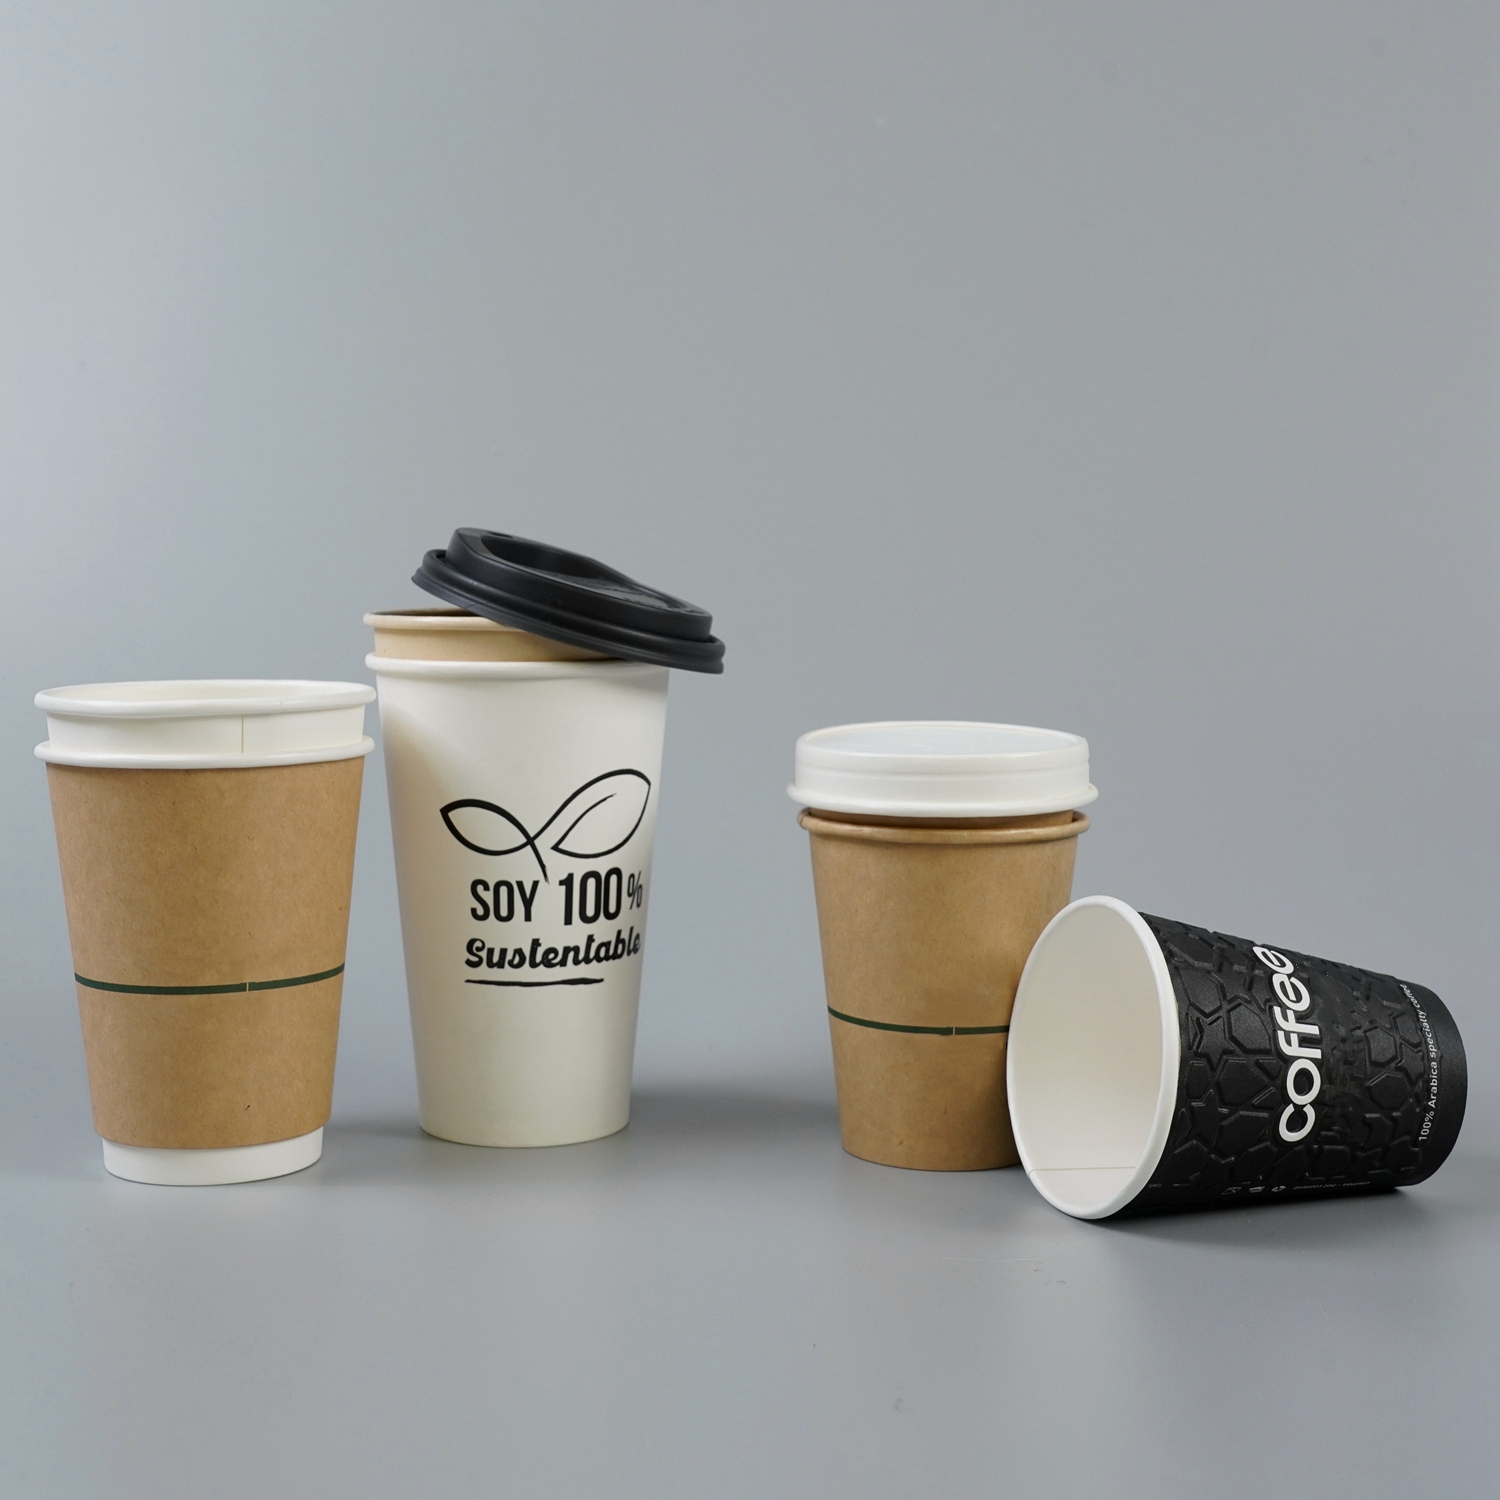 https://images.51microshop.com/12314/product/20220318/12OZ_Single_Wall_Coffee_Paper_Cups_PLA_coating_1647569245186_1.jpg